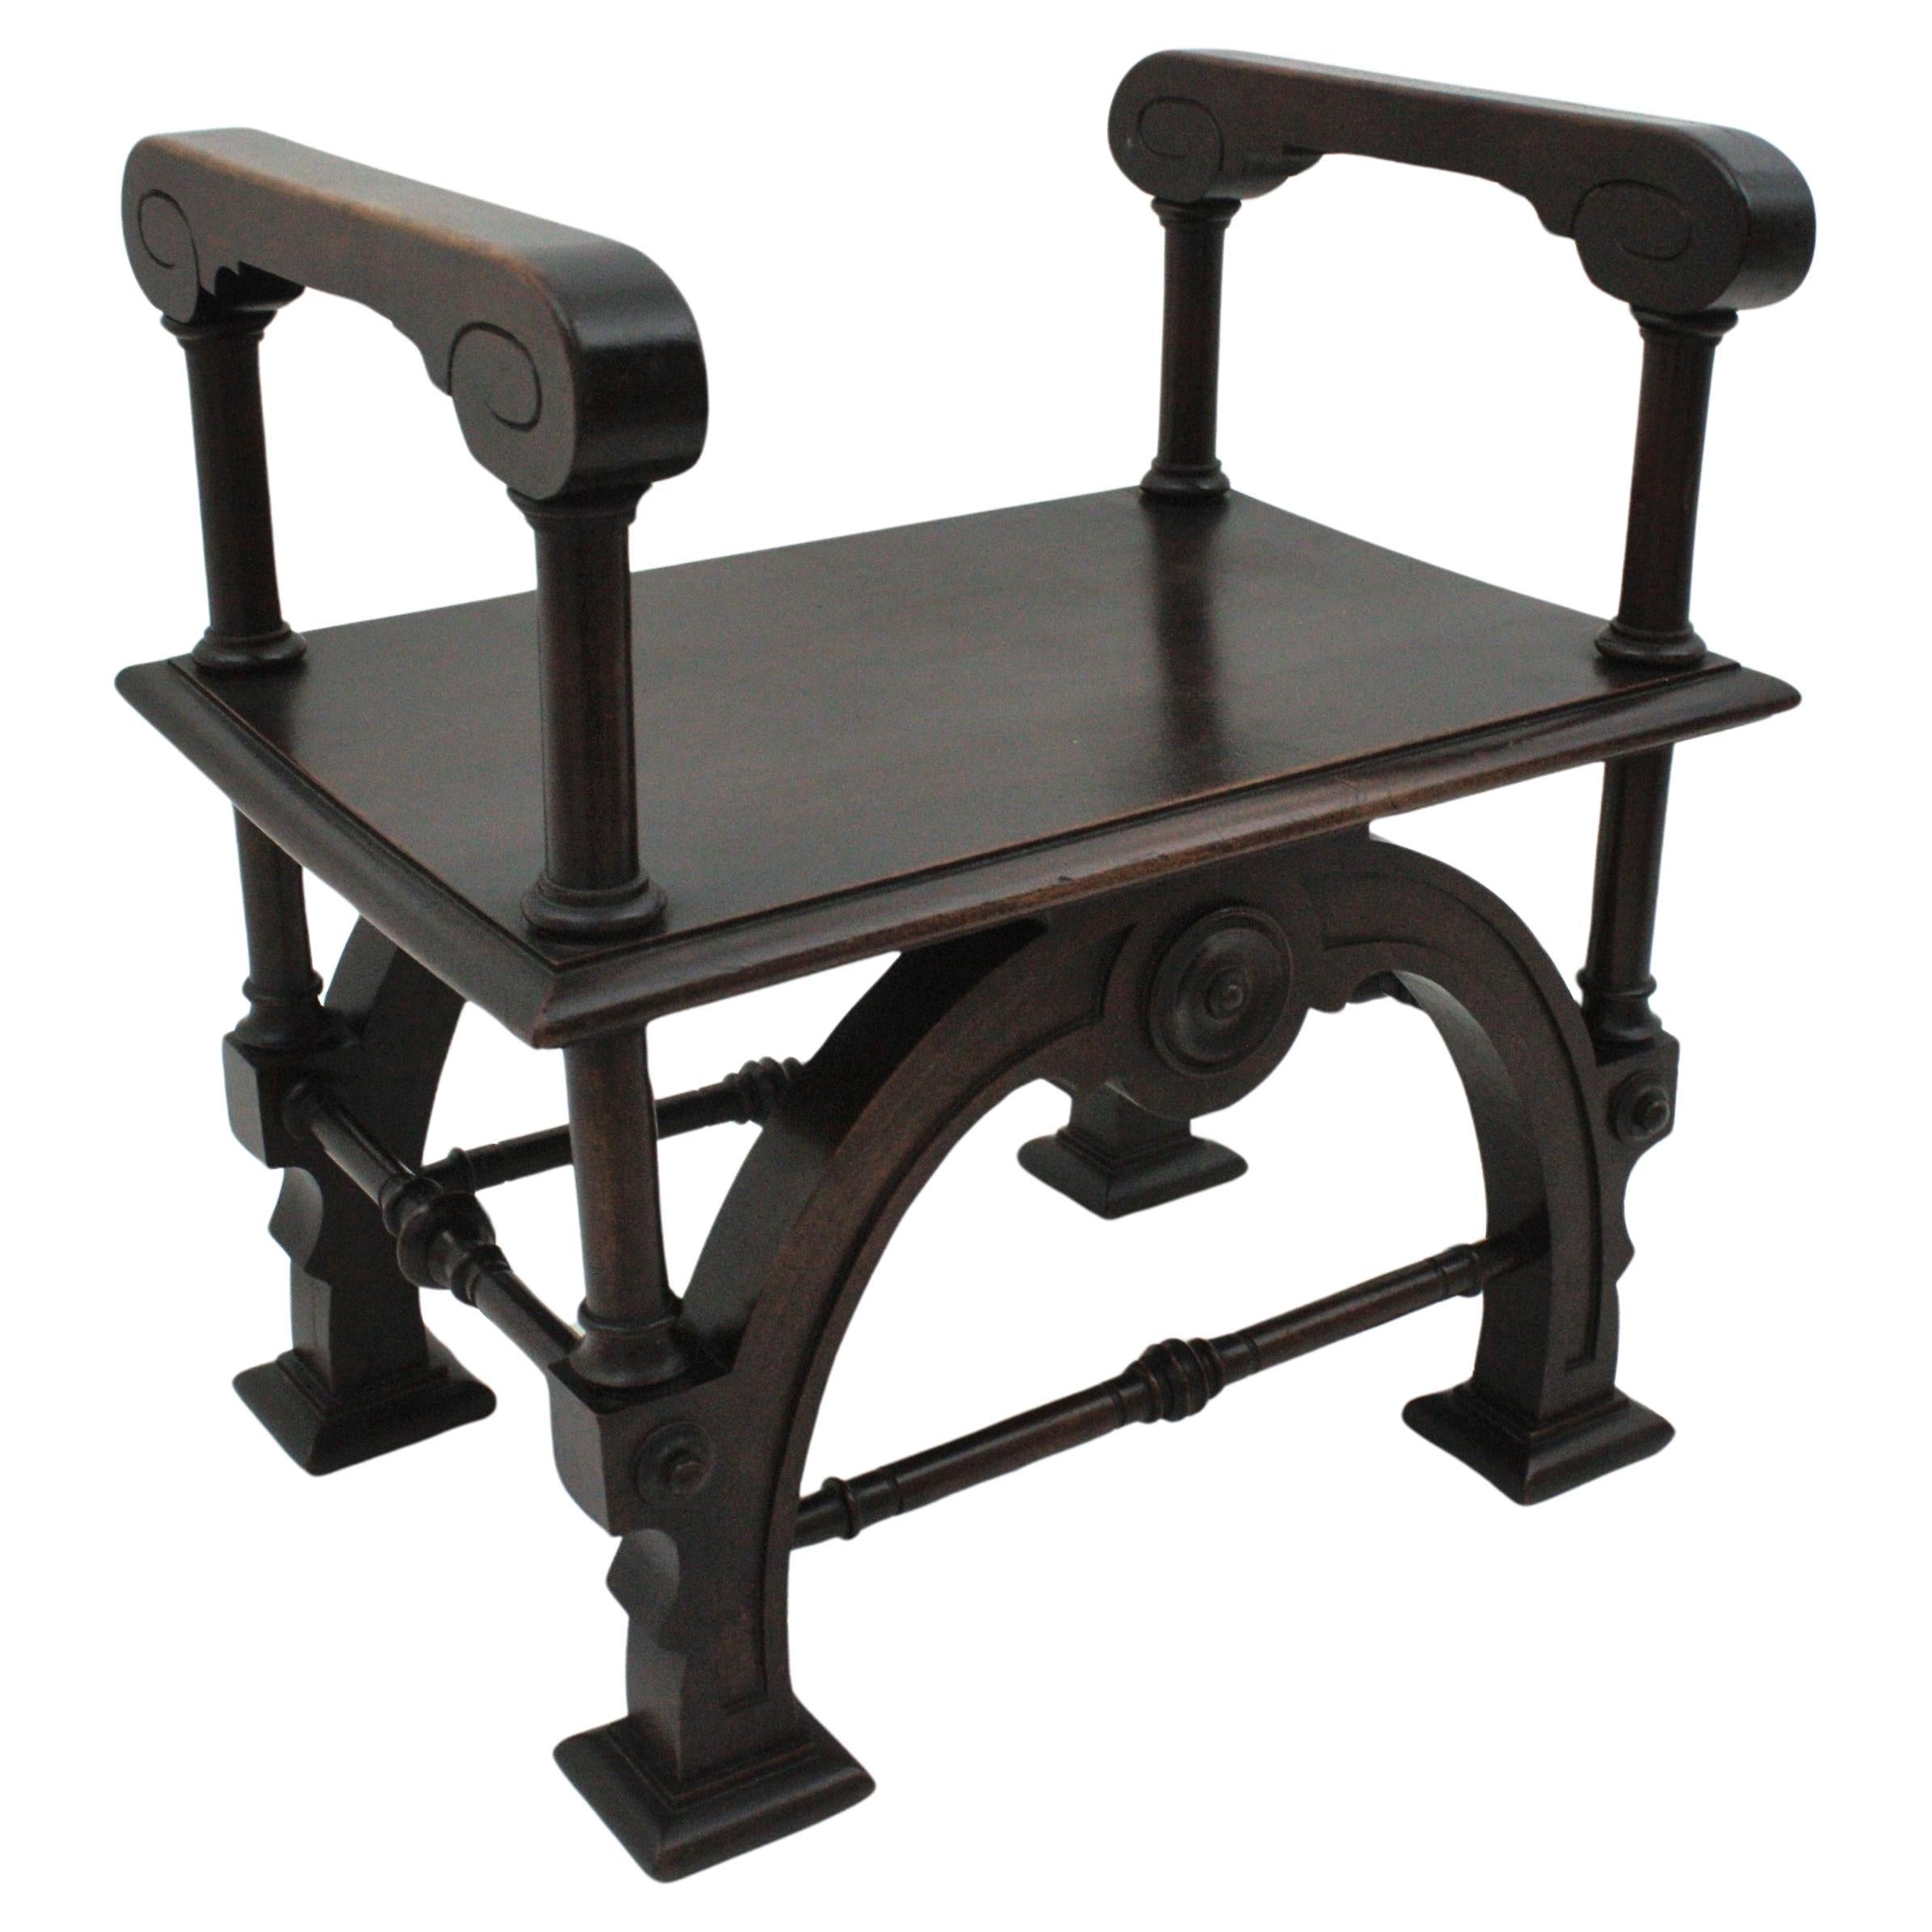 Carved Walnut Curule Stool with Arms, Spain, 1930s-1940s.
Curule base with carved decorative details and arms at both sides.
To be used as stool, ottoman, night stand or occasional side table.
It will be a nice addition to any spanish revival